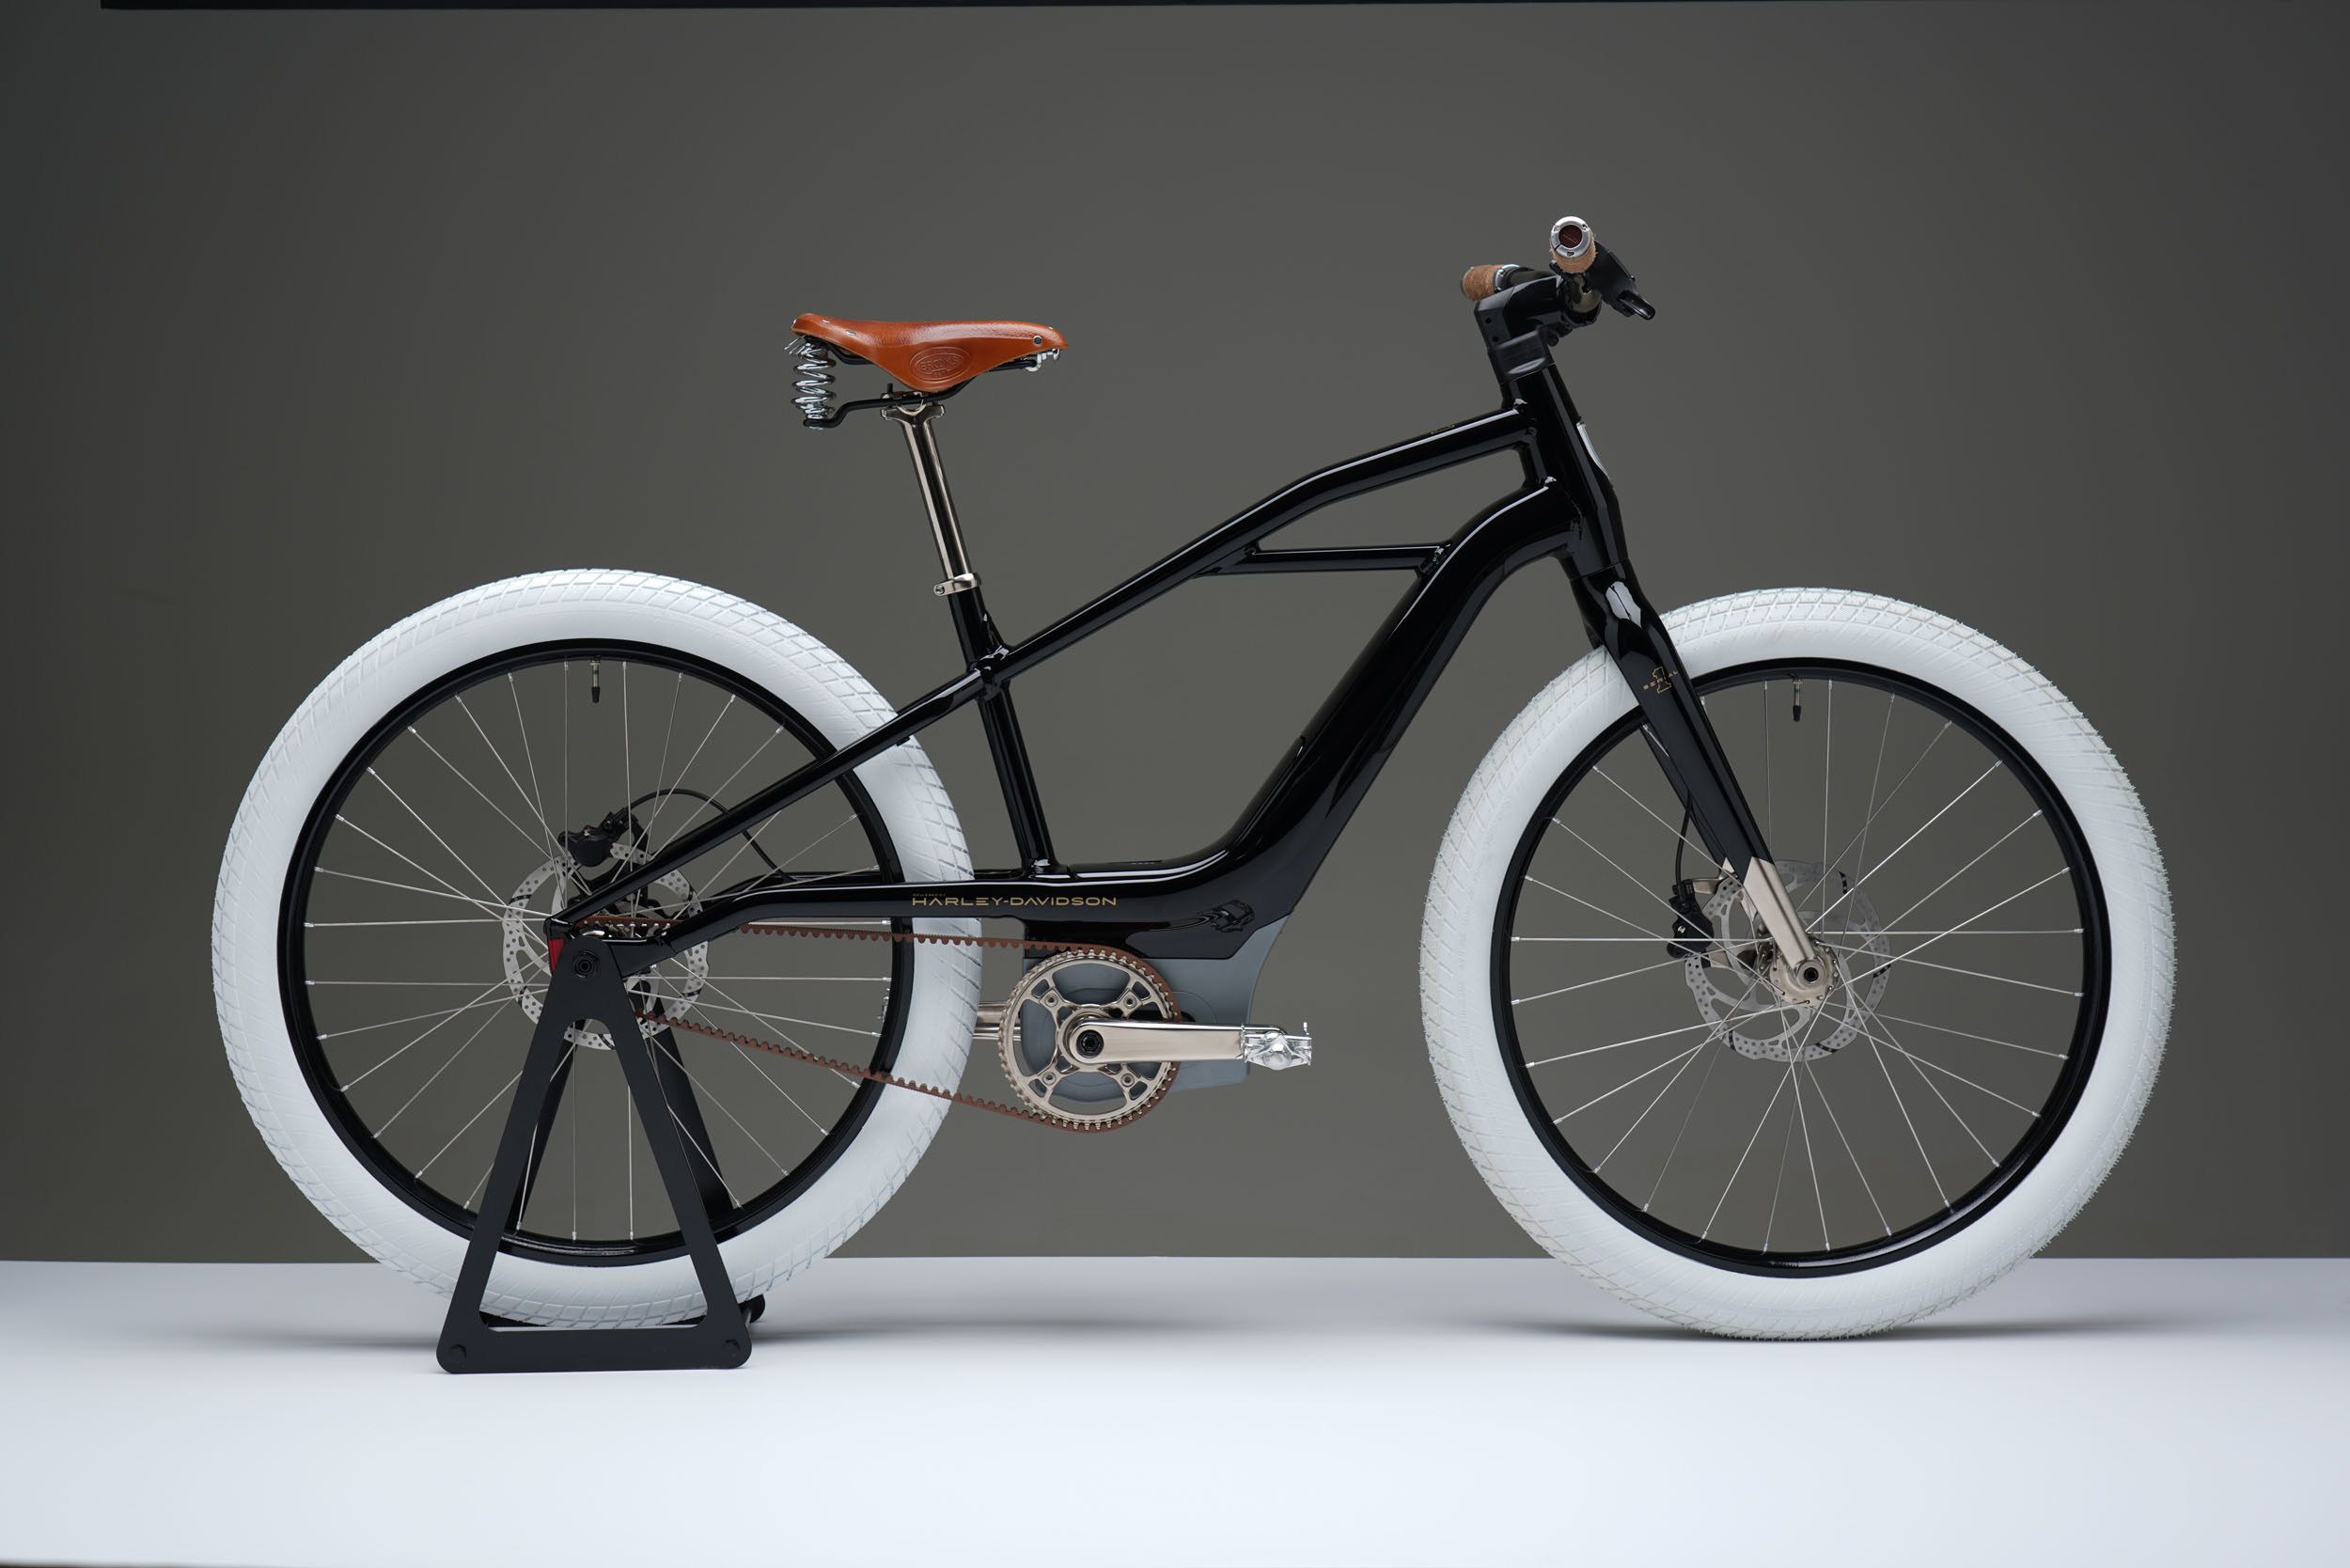 electric cycle with gear